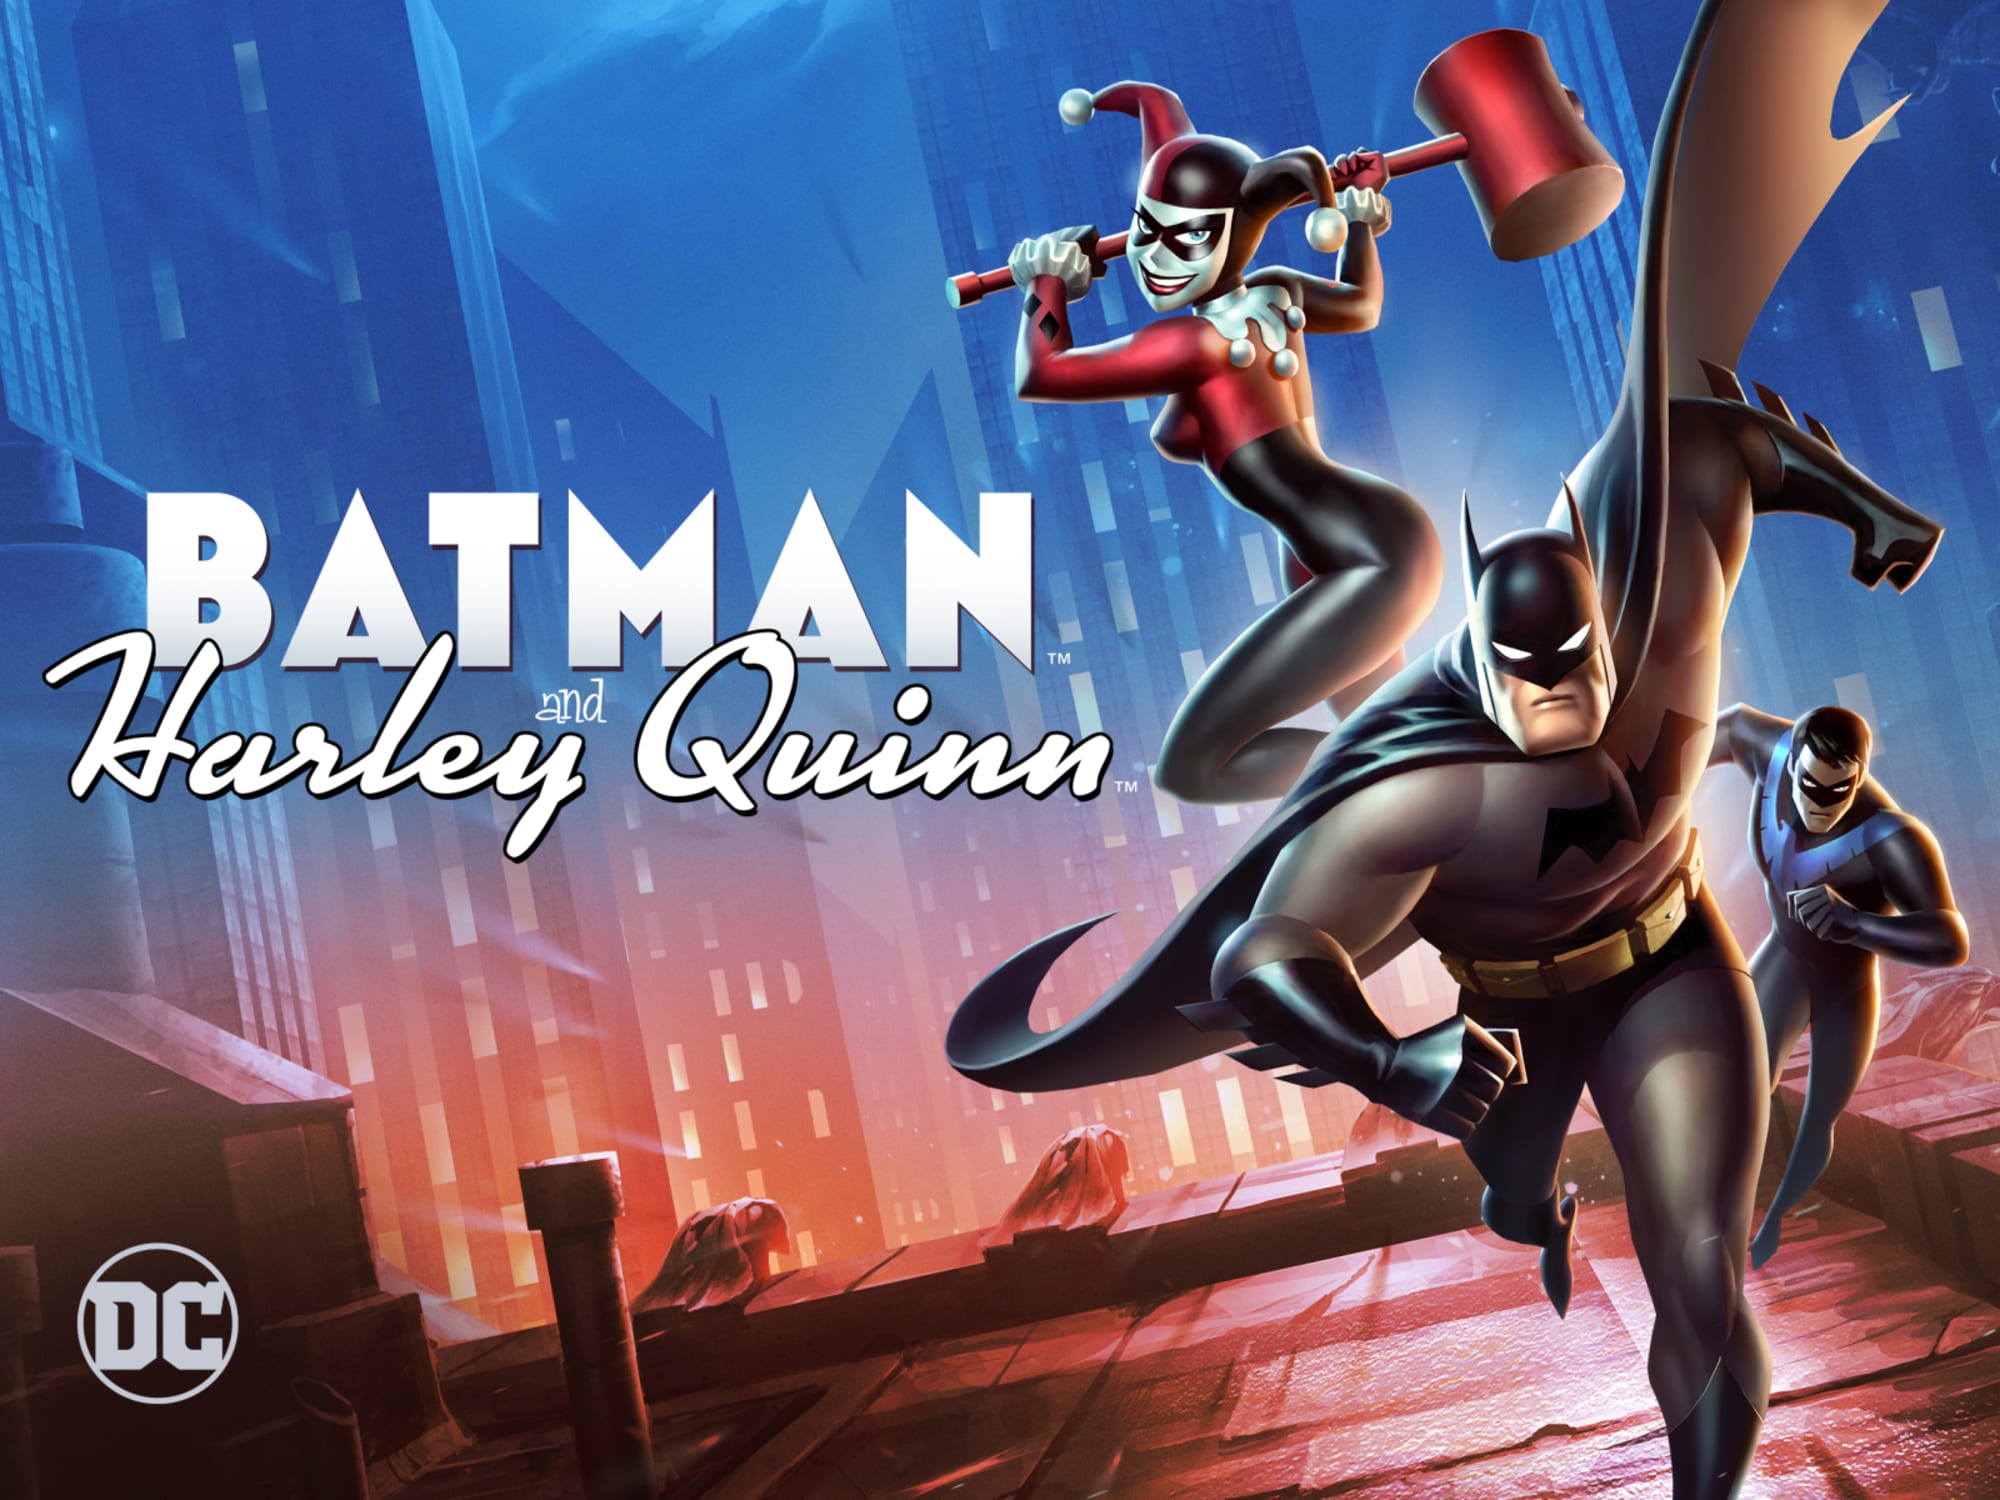 Batman and Harley Quinn arriving on DC Universe this month